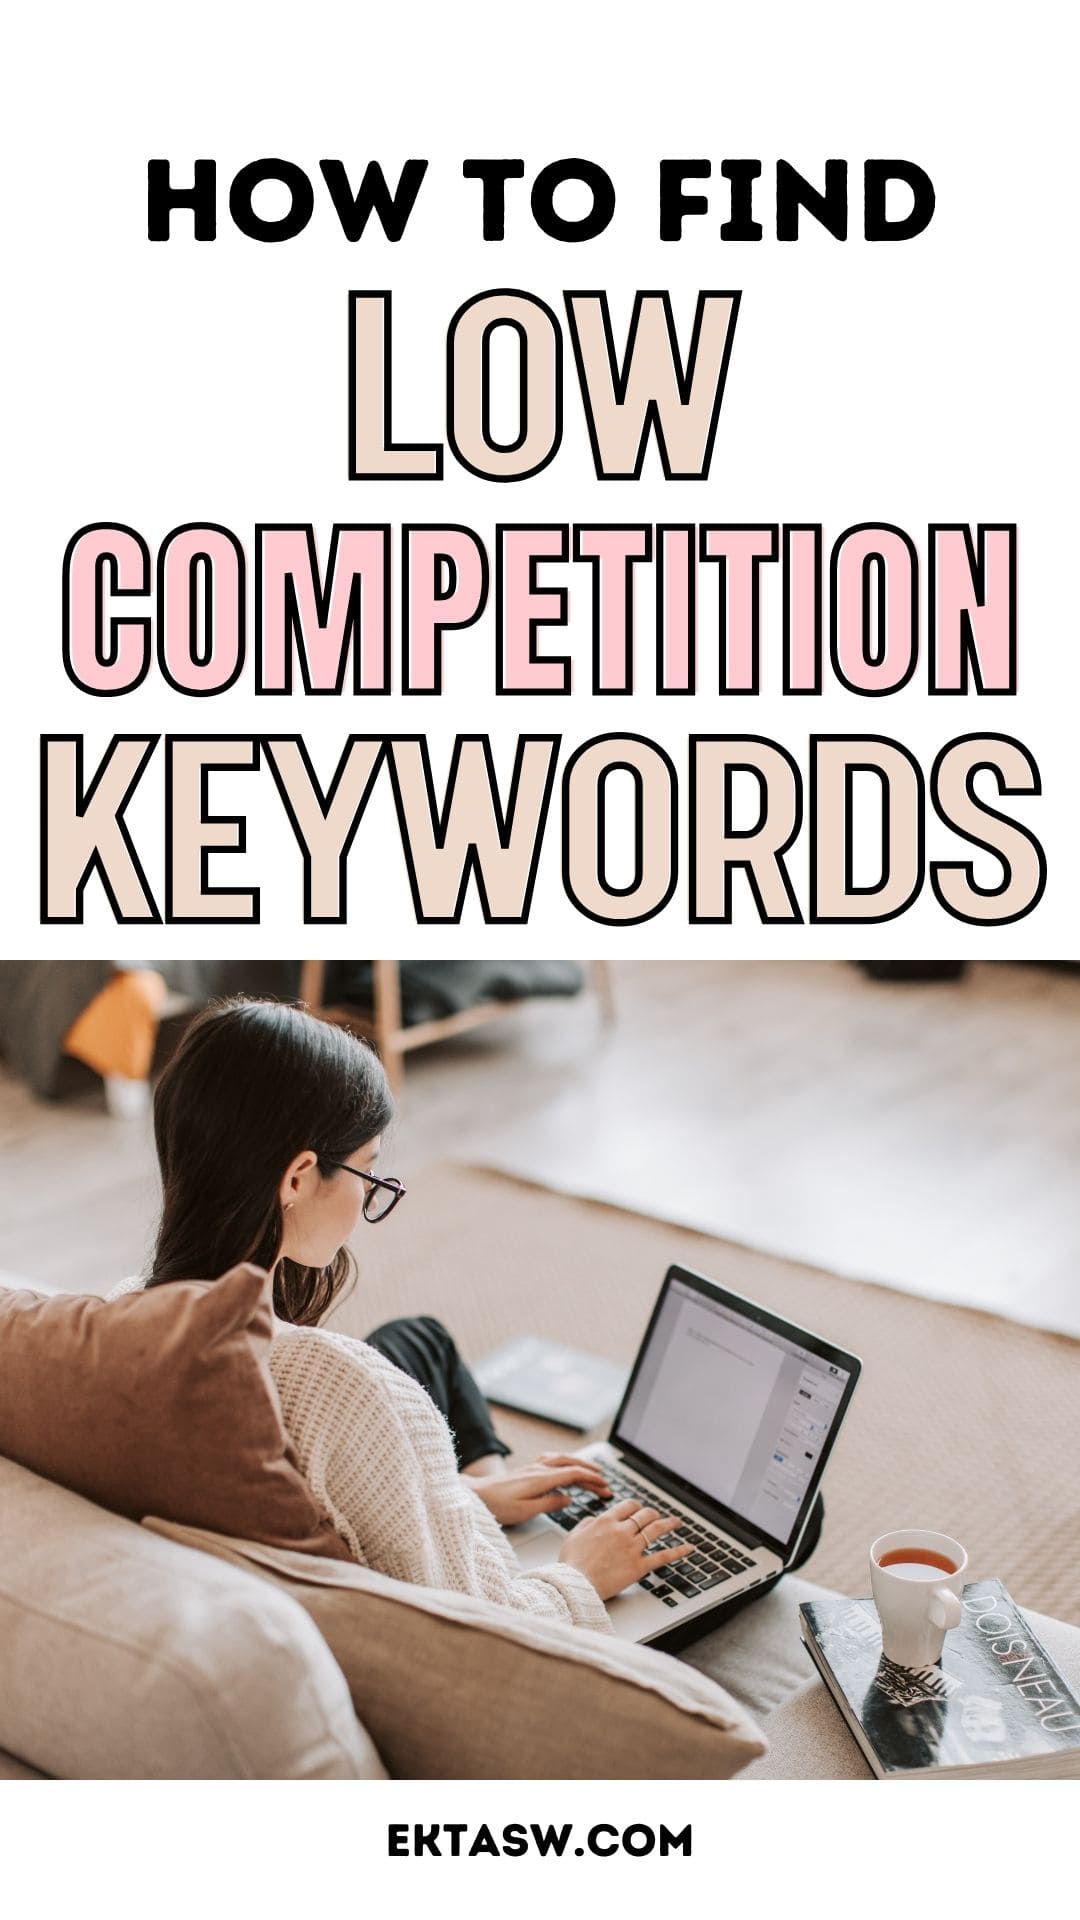 how to find low competition keywords with high traffic